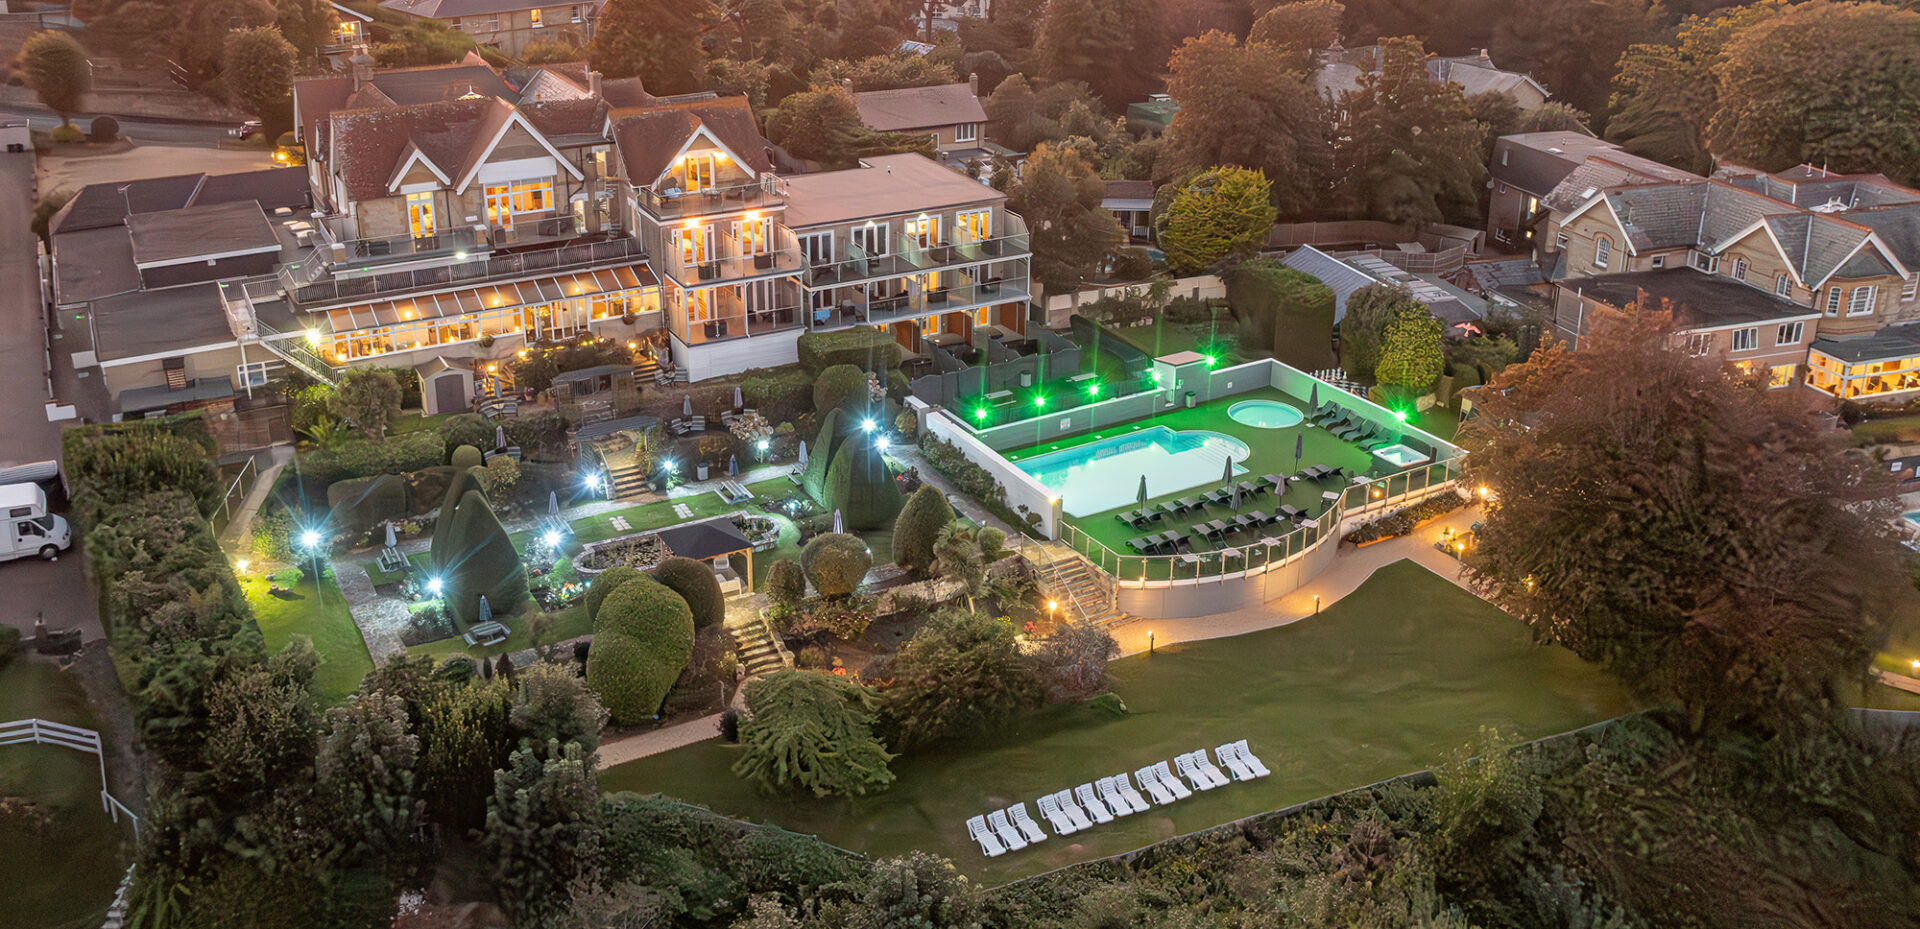 Luccombe Hall Hotel and Grounds Aerial View, Shanklin, Isle of Wight